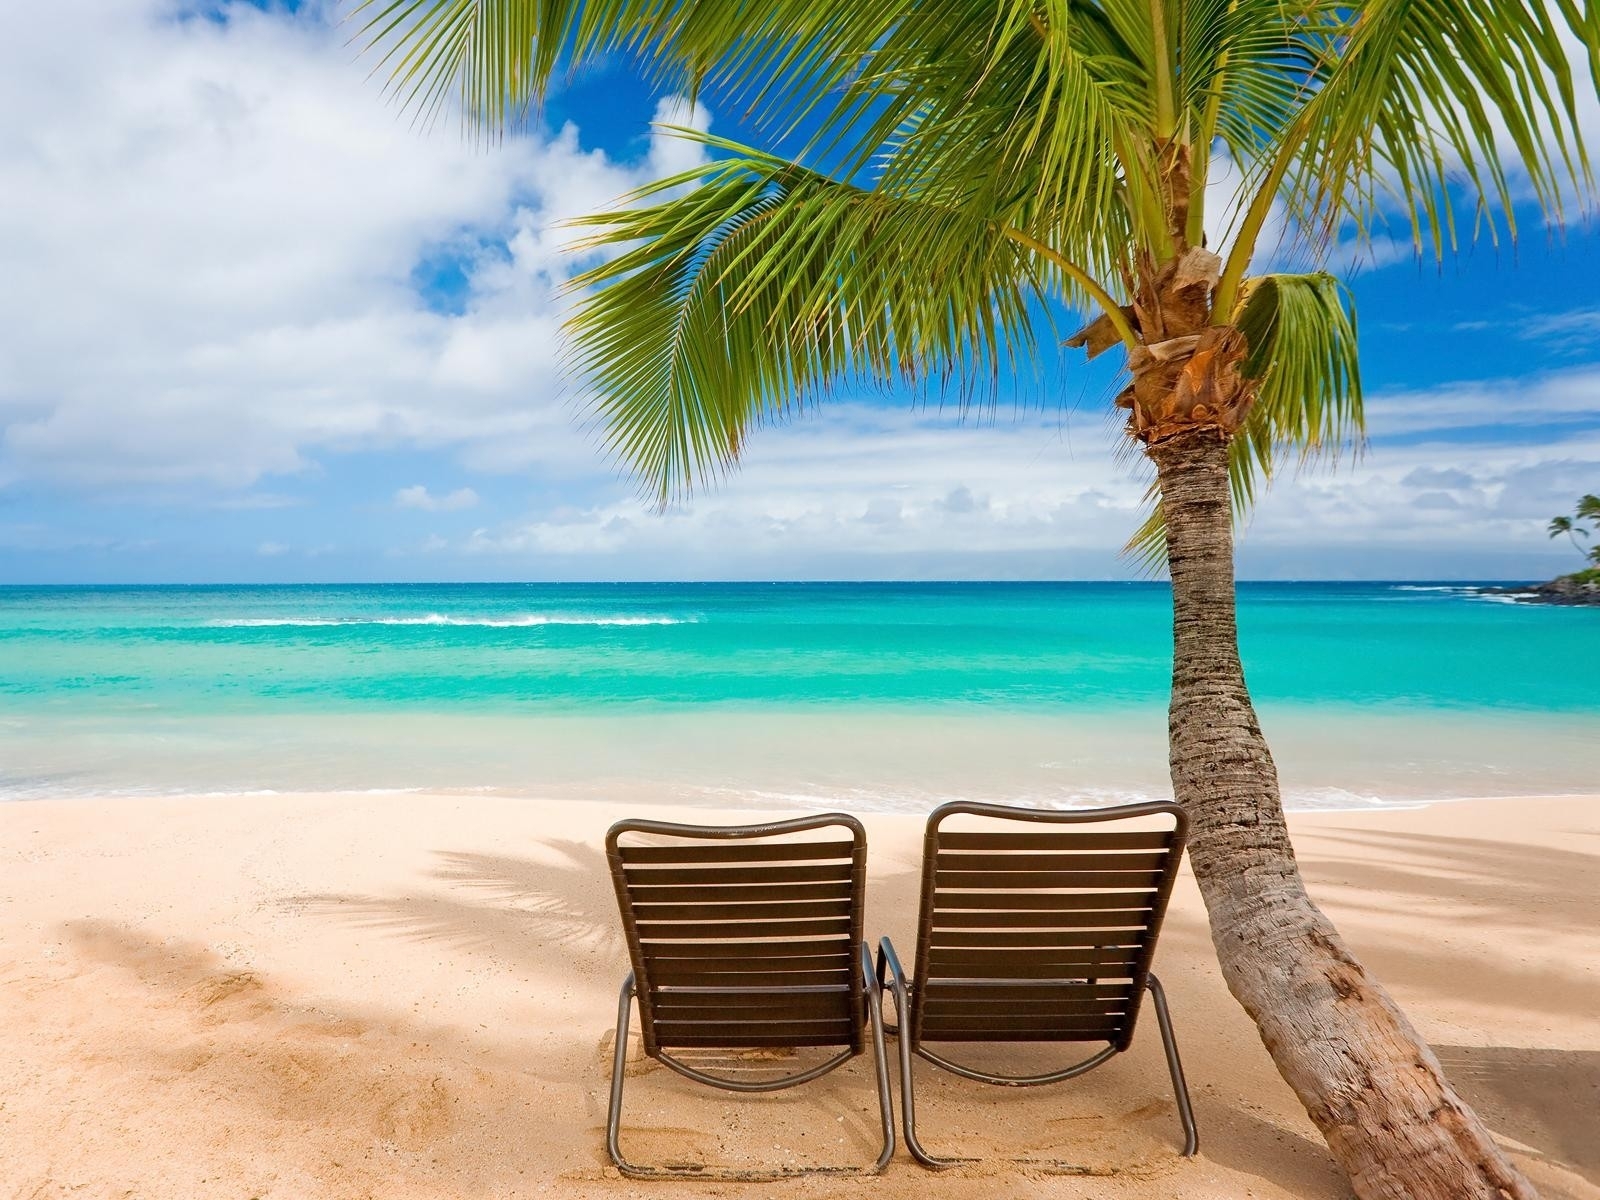 Title : free computer wallpaper backgrounds beach awesome amazing tropical ...